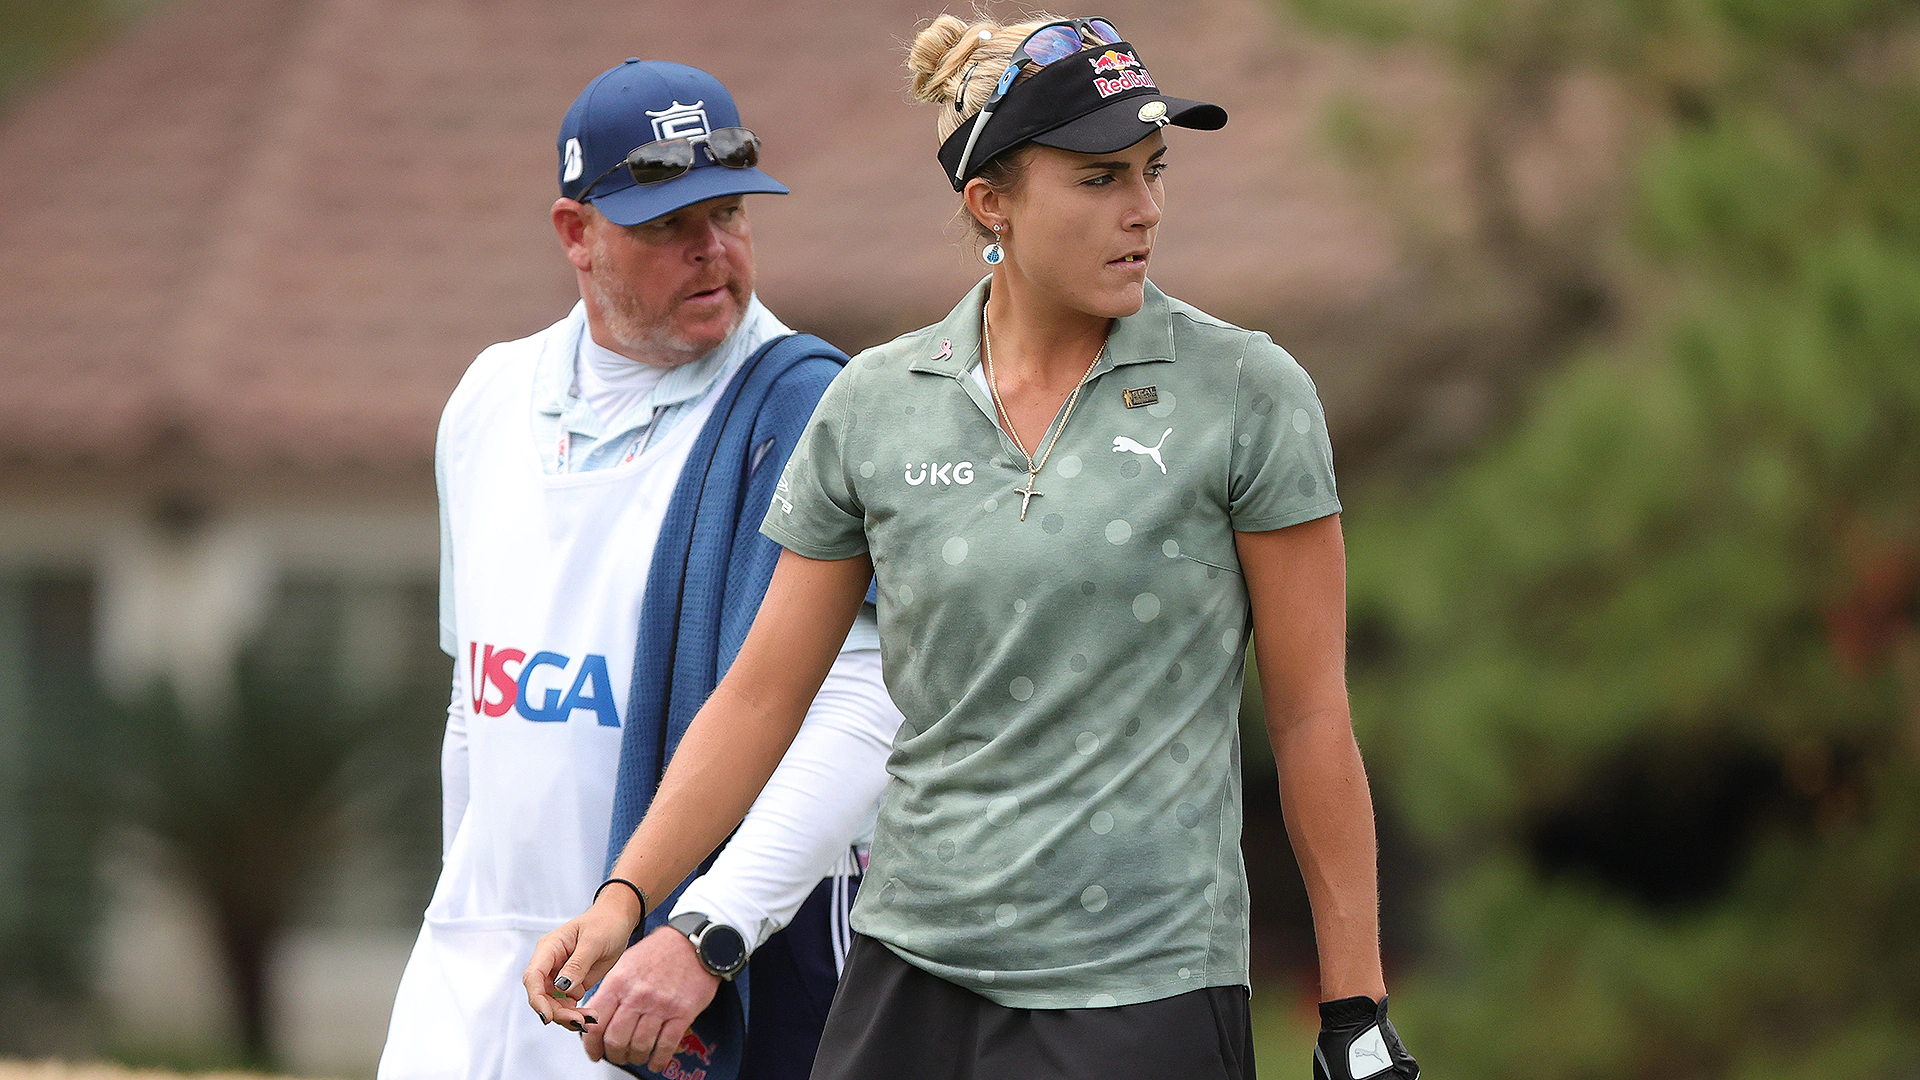 Lexi Thompson, Nelly Korda among the notables who miss cut at U.S. Women’s Open